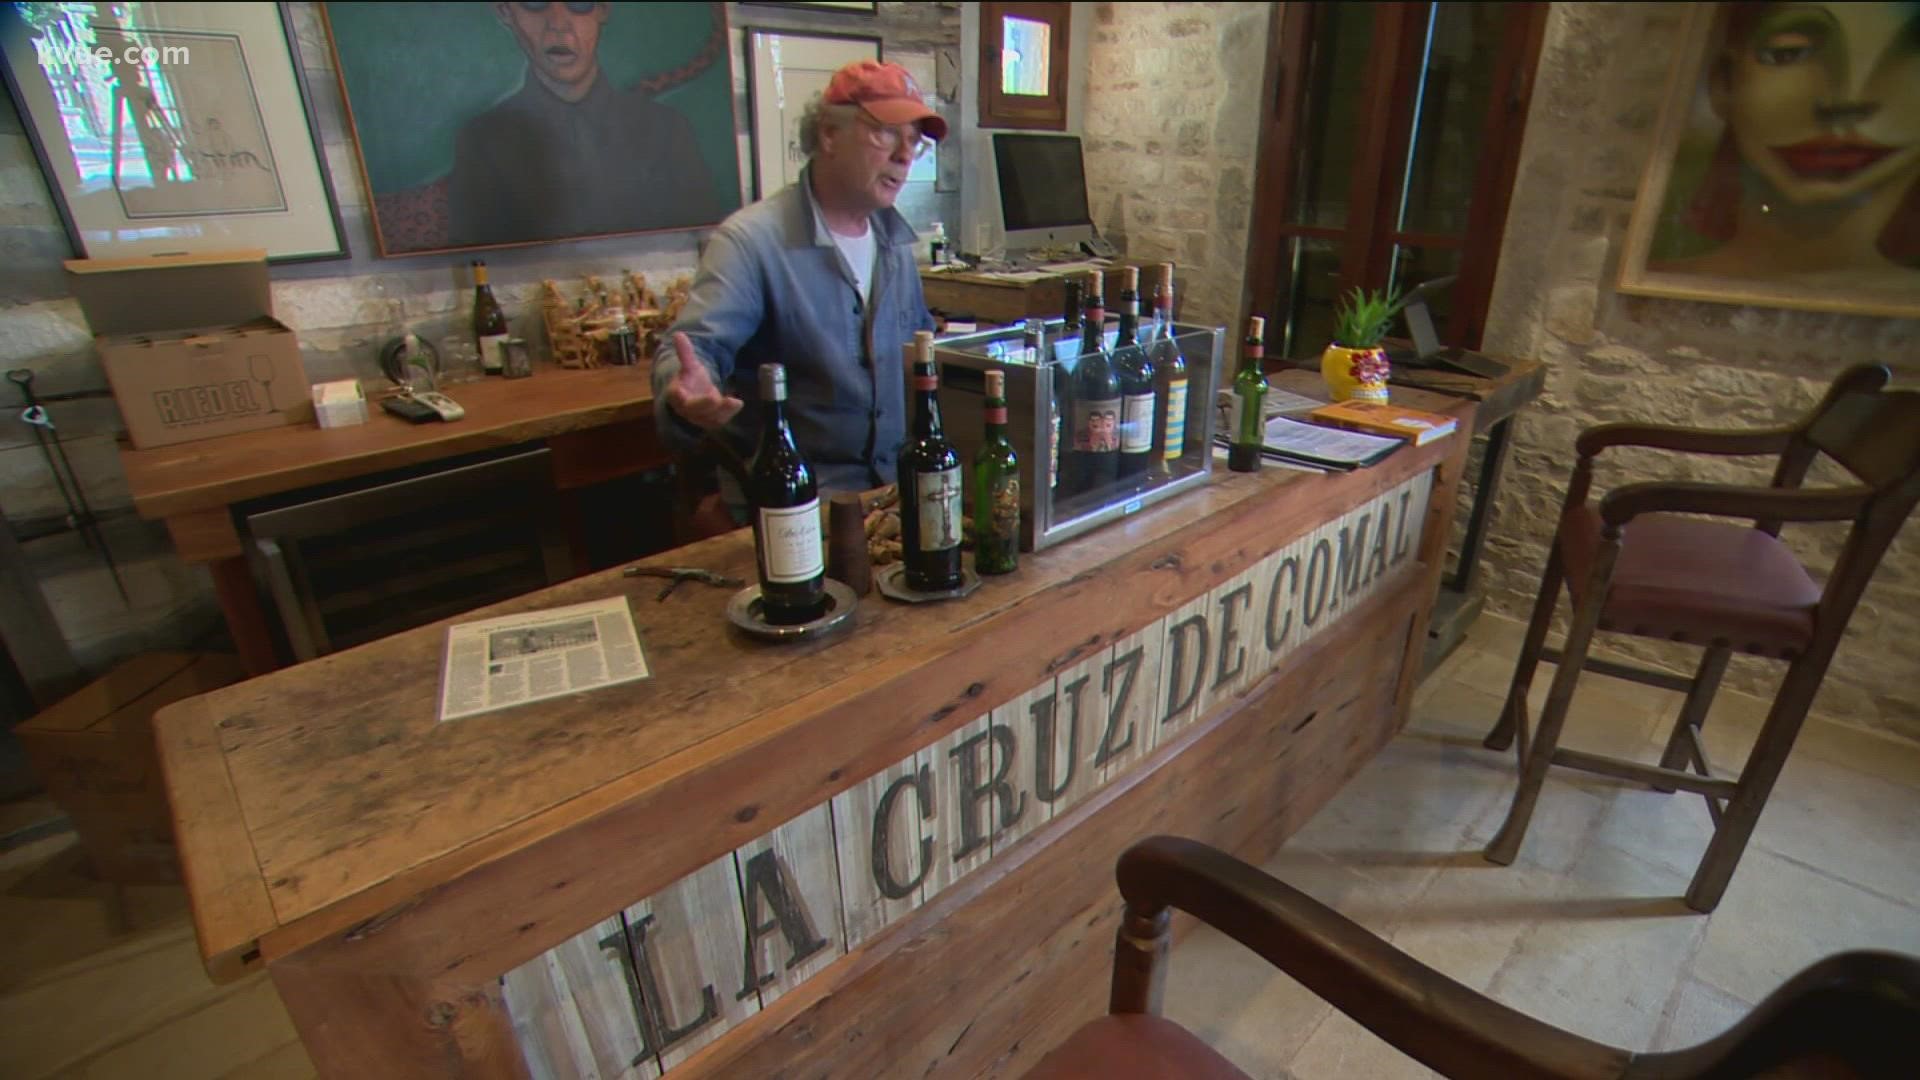 The Texas wine industry is booming, and Central Texas is leading the way. KVUE takes a deep dive into the world of Texas wine.